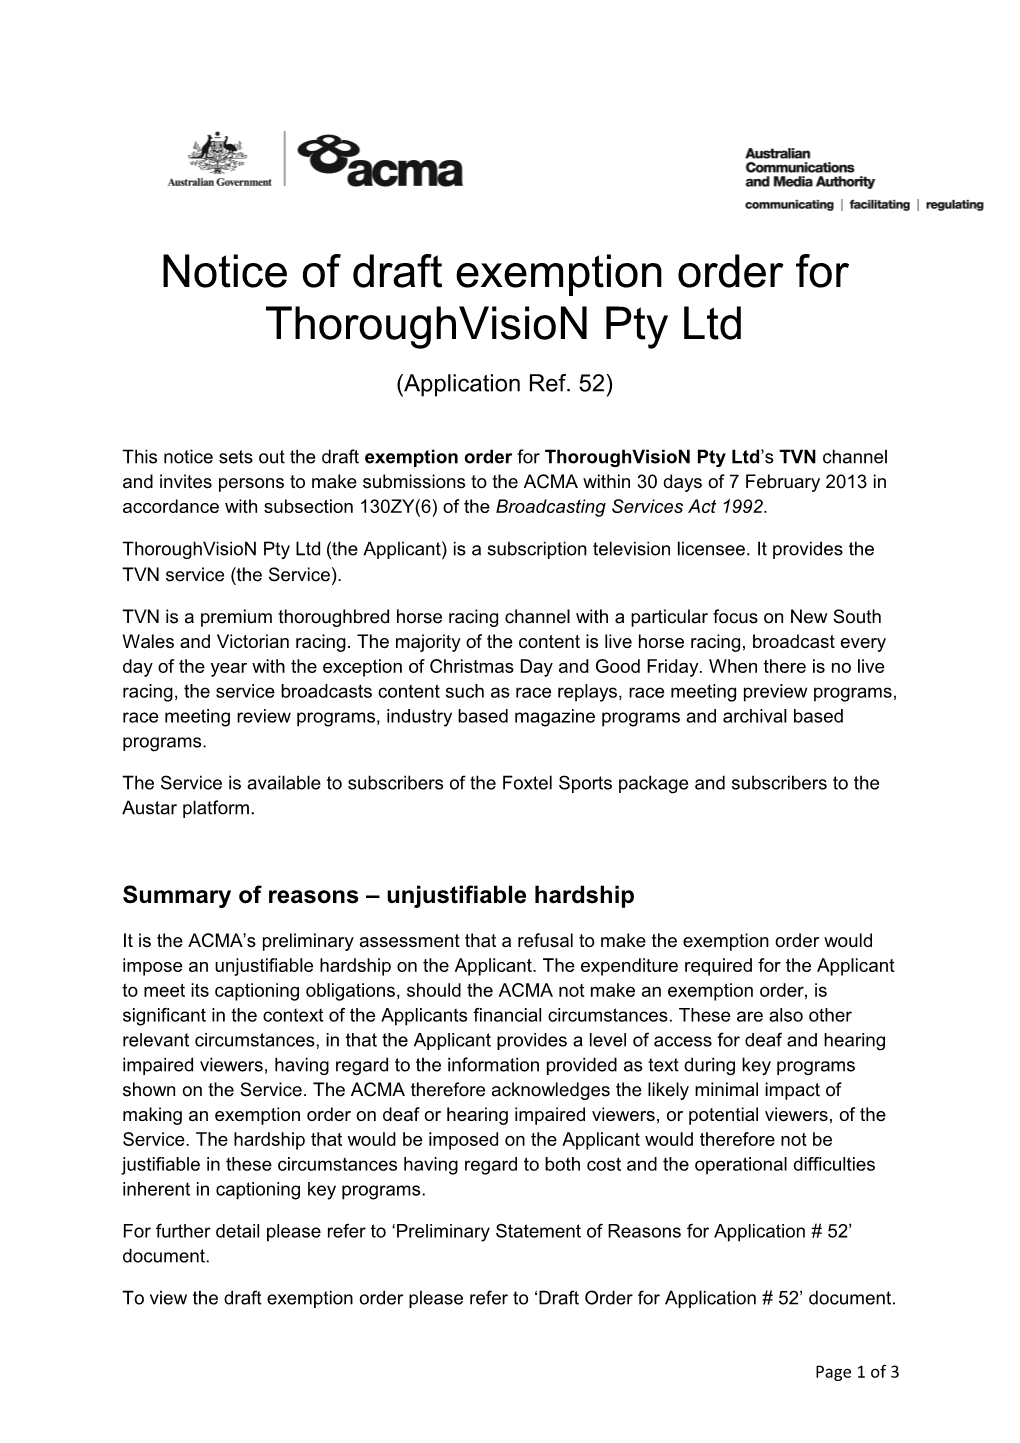 Notice of Draft Exemption Order for Thoroughvision Cons 52